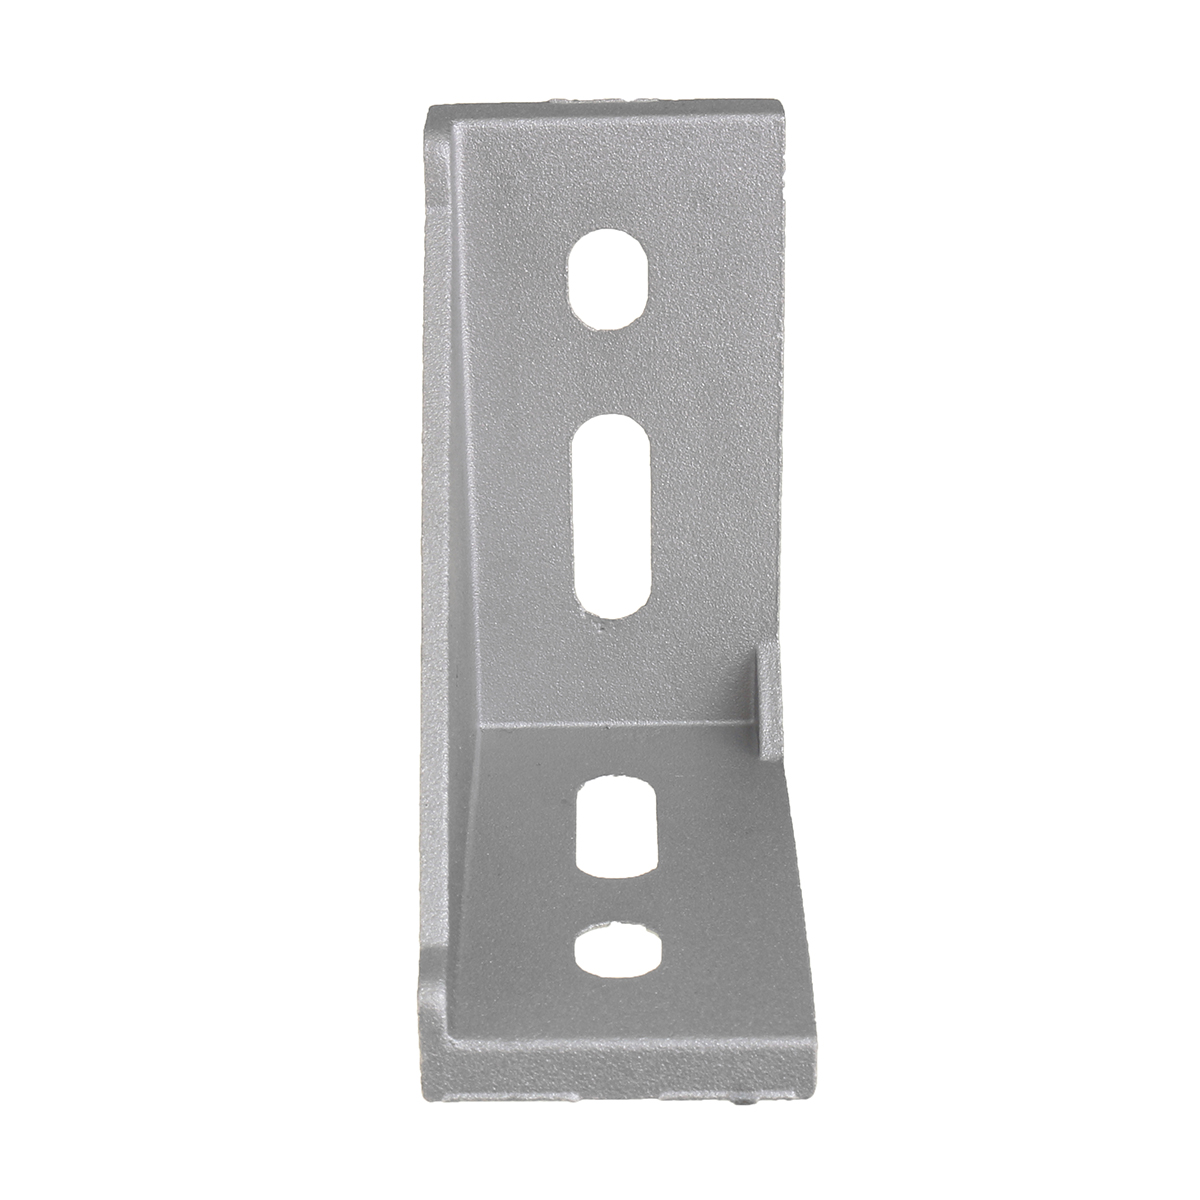 Sulevetrade-AJ40-40times80mm-Aluminum-Angle-Corner-Joint-Connector-90-degrees-4080-Series-Aluminum-P-1293672